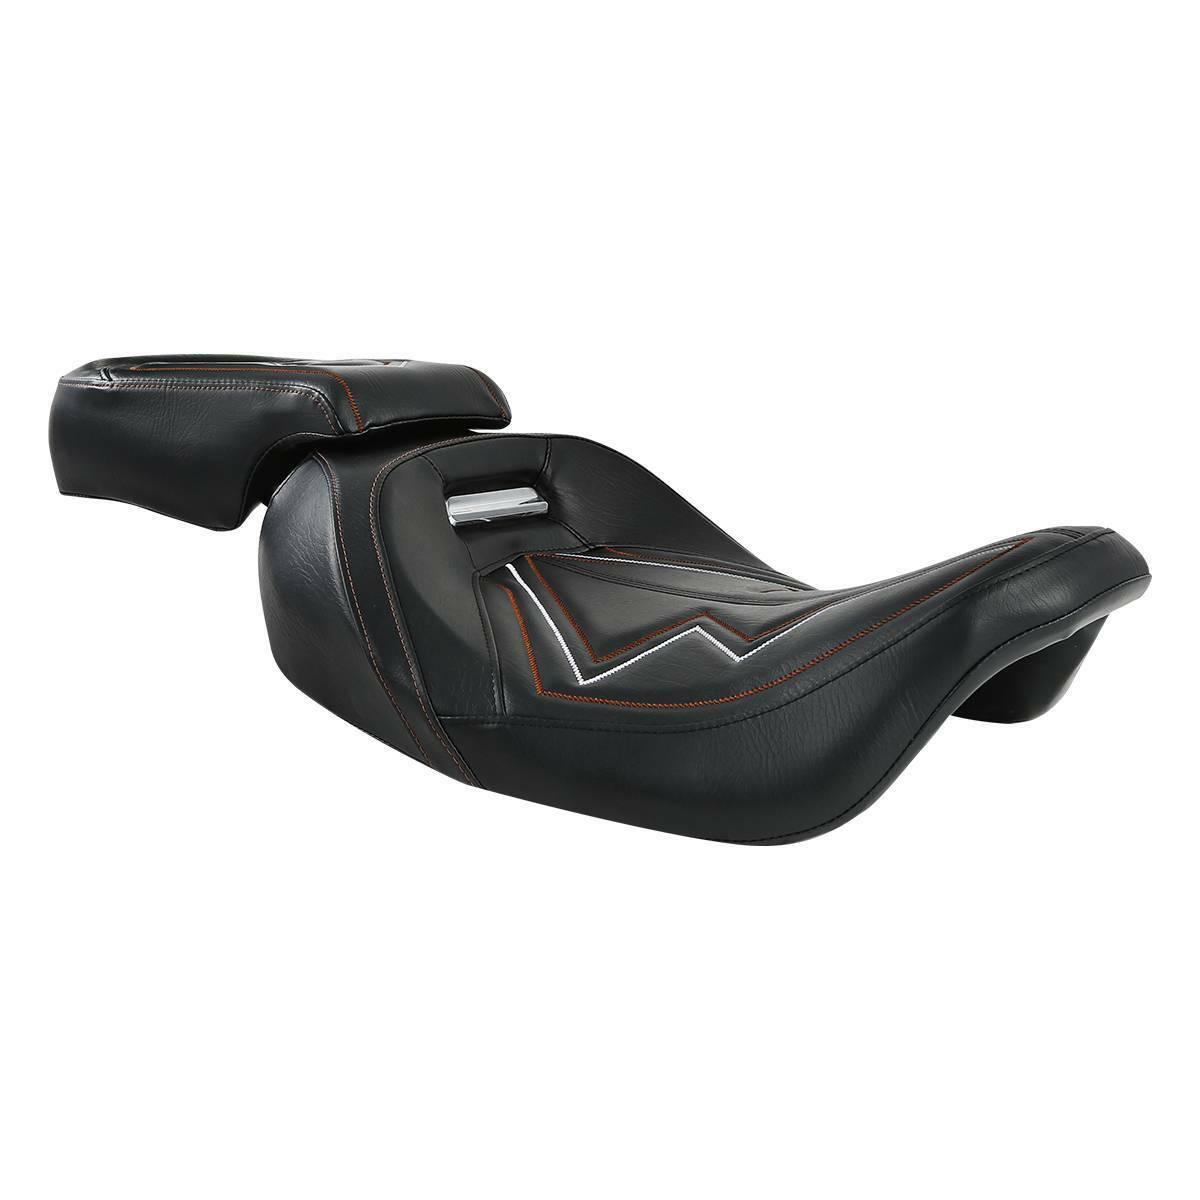 Driver & Passenger Front Rear Seat Fit For Harley Touring Road King Glide 09-21 - Moto Life Products